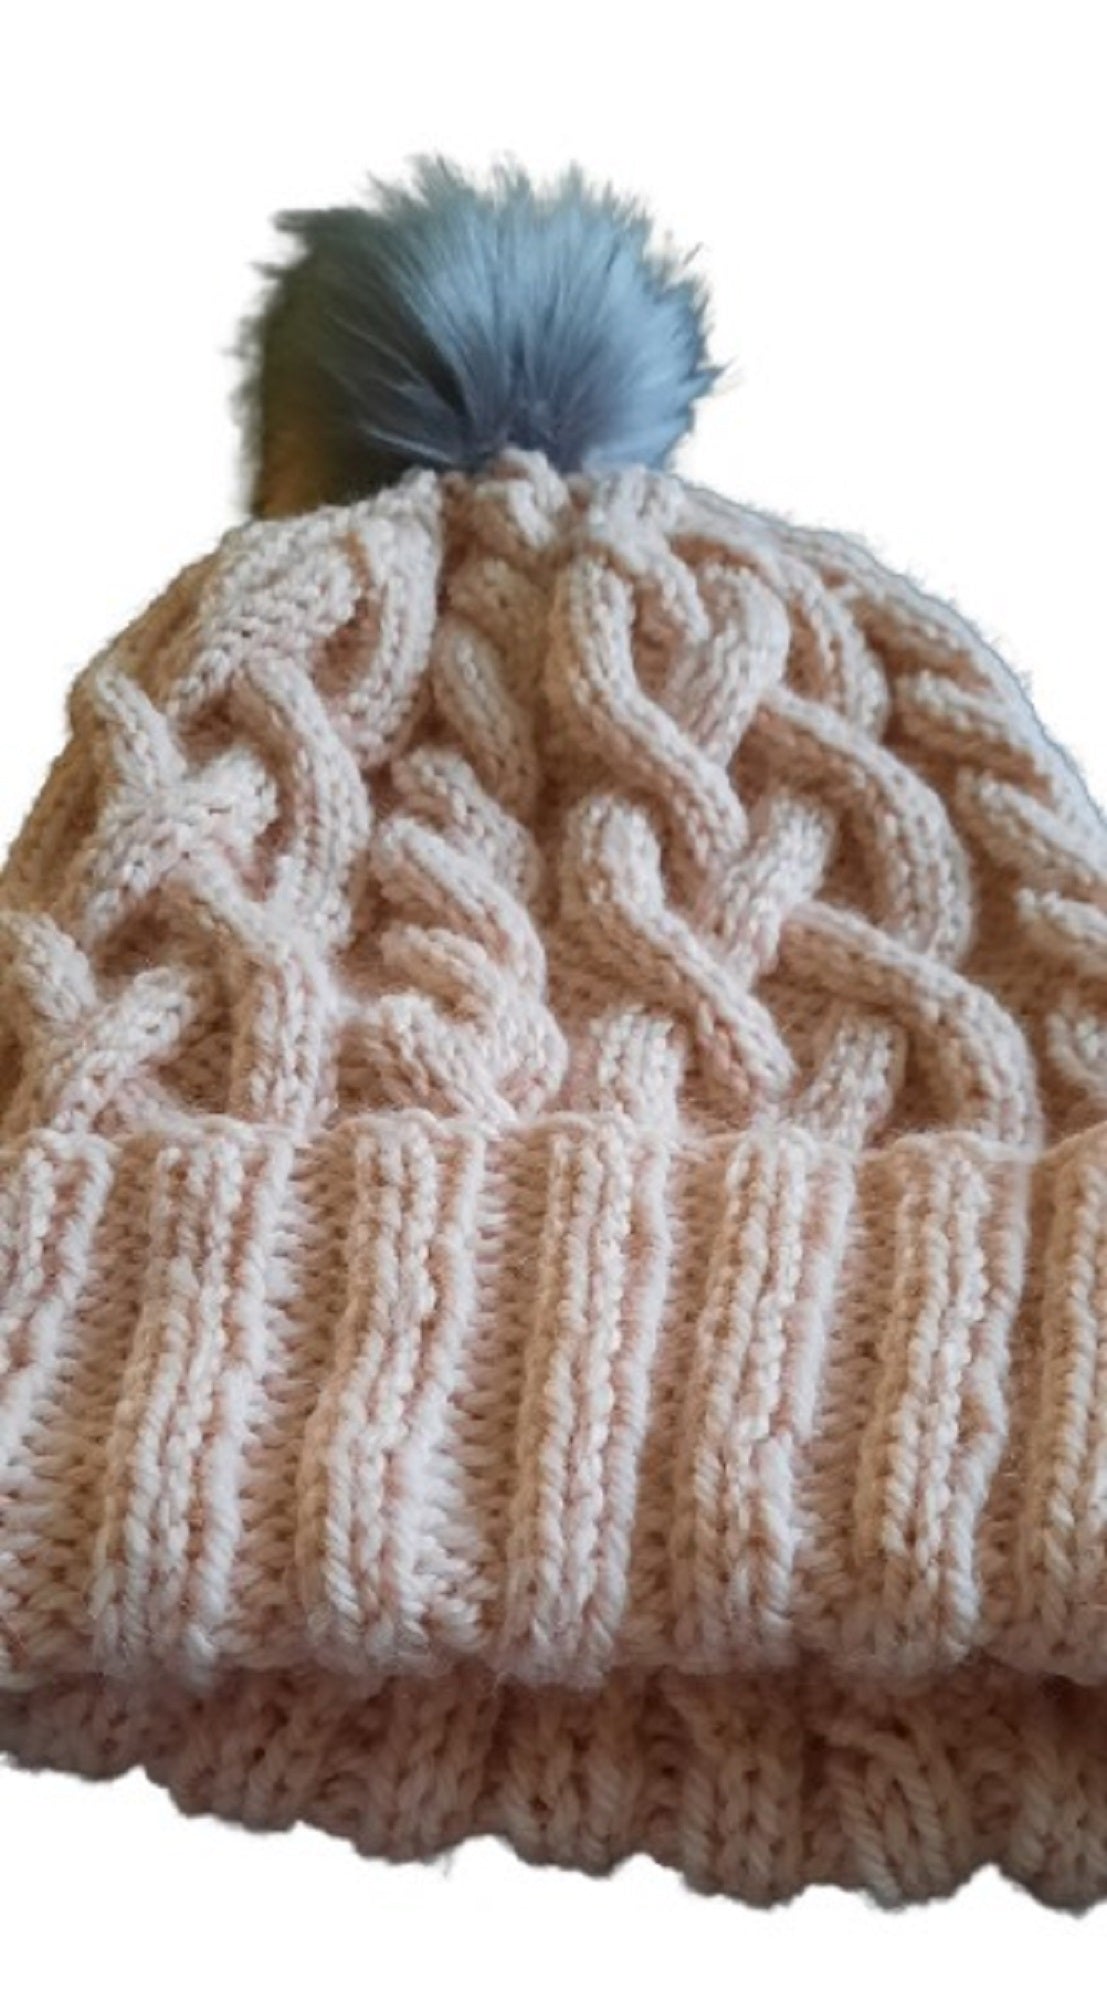 Light Pink Hat Hand Knitted Cable Hat and Detachable Pom Pom by Free Spirit Accessories sold by Free Spirit Accessories